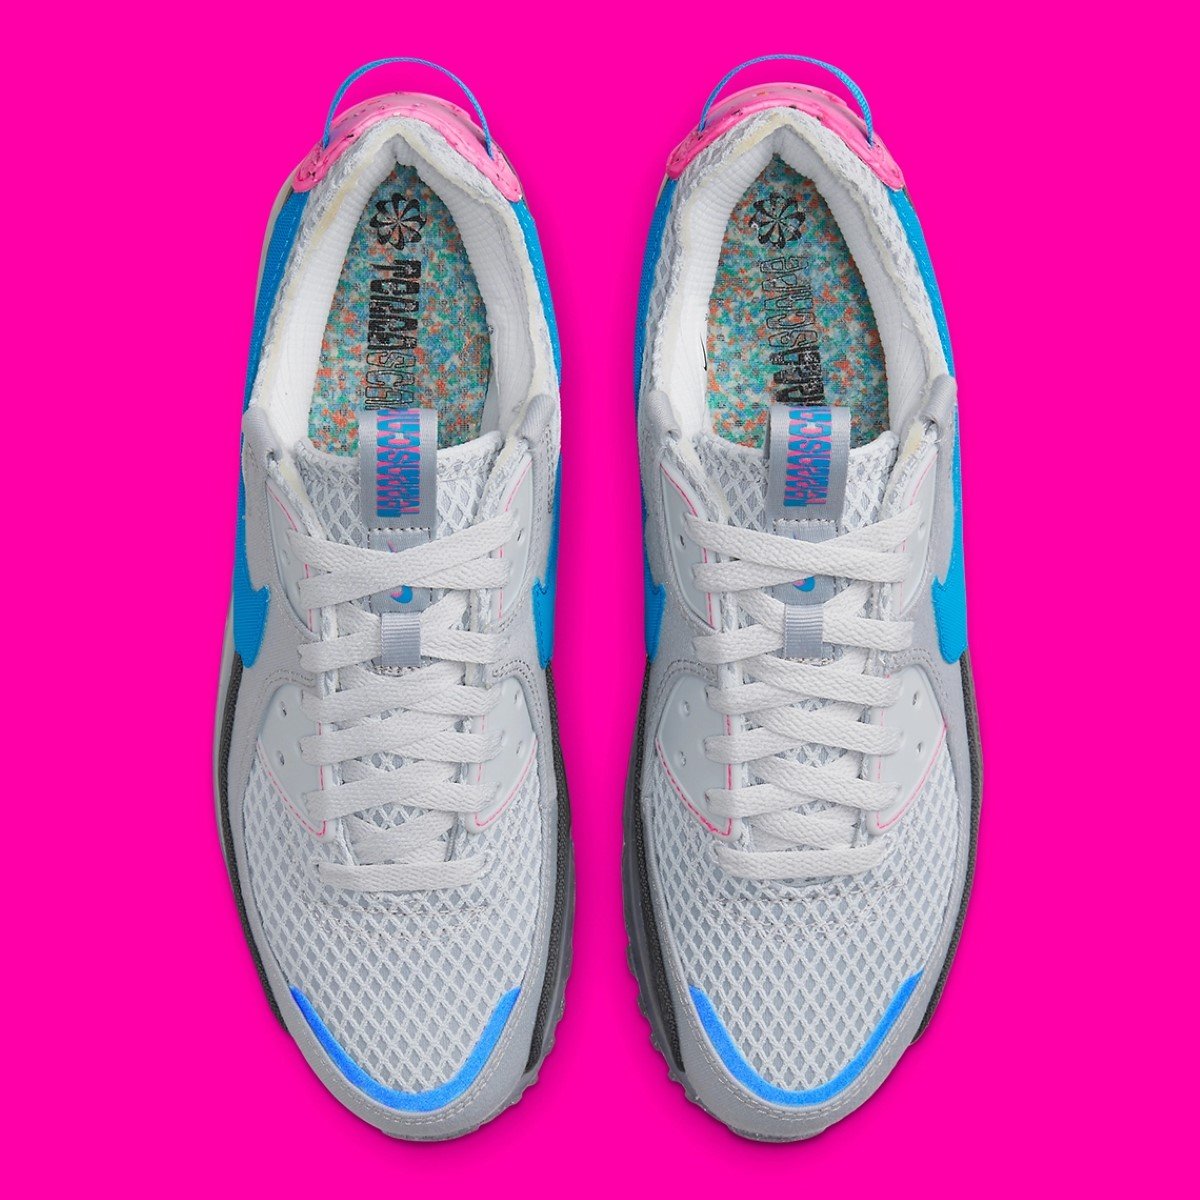 Nike Air Max 90 Terrascape "Cotton Candy"